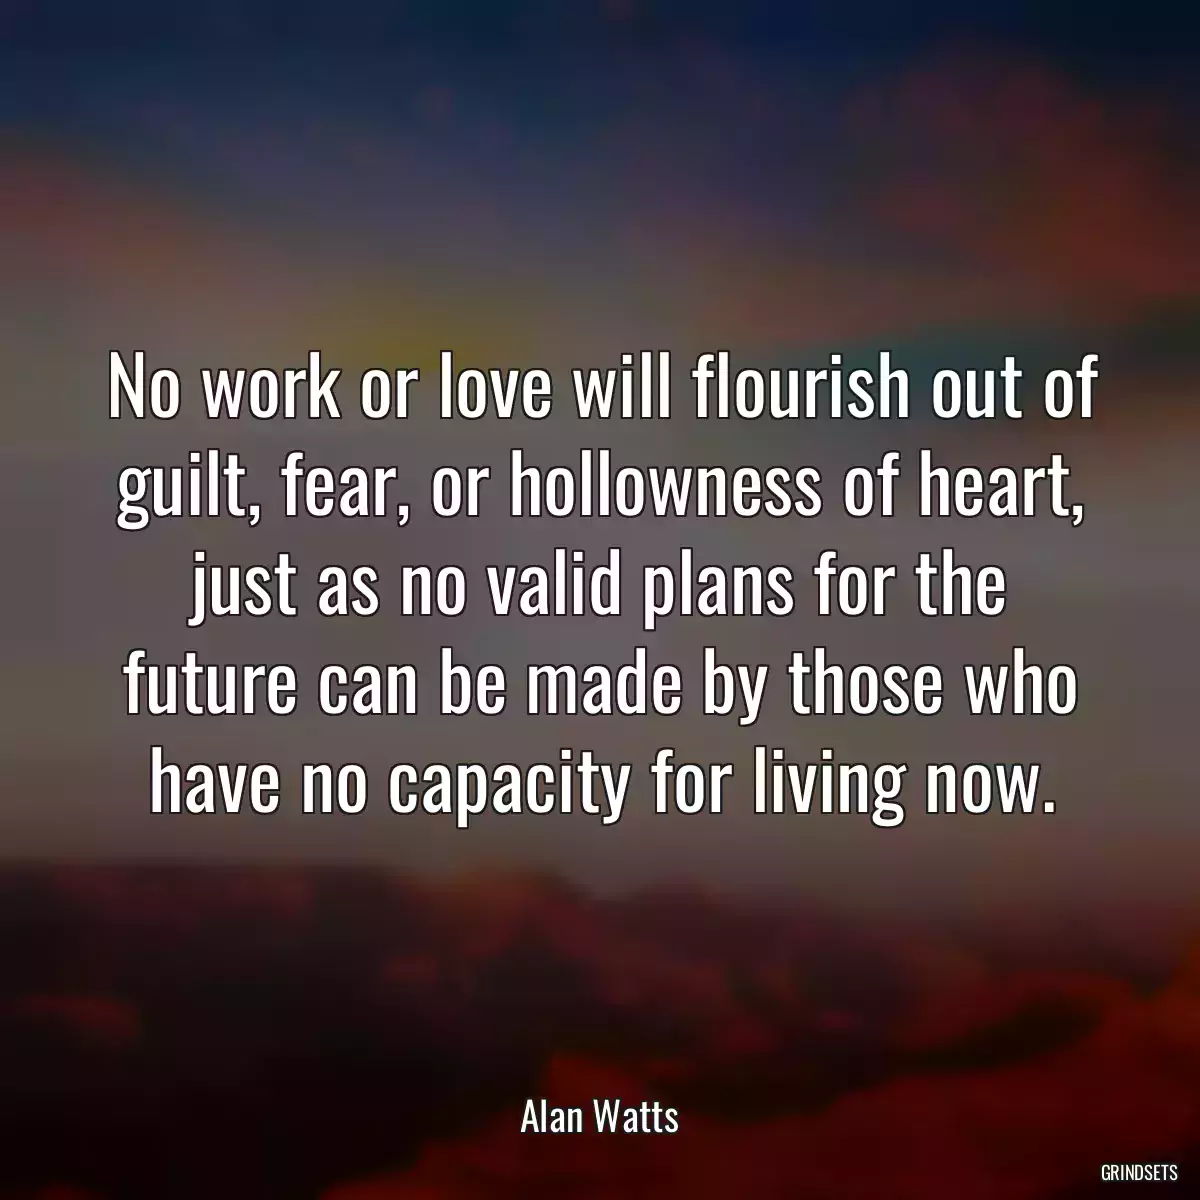 No work or love will flourish out of guilt, fear, or hollowness of heart, just as no valid plans for the future can be made by those who have no capacity for living now.